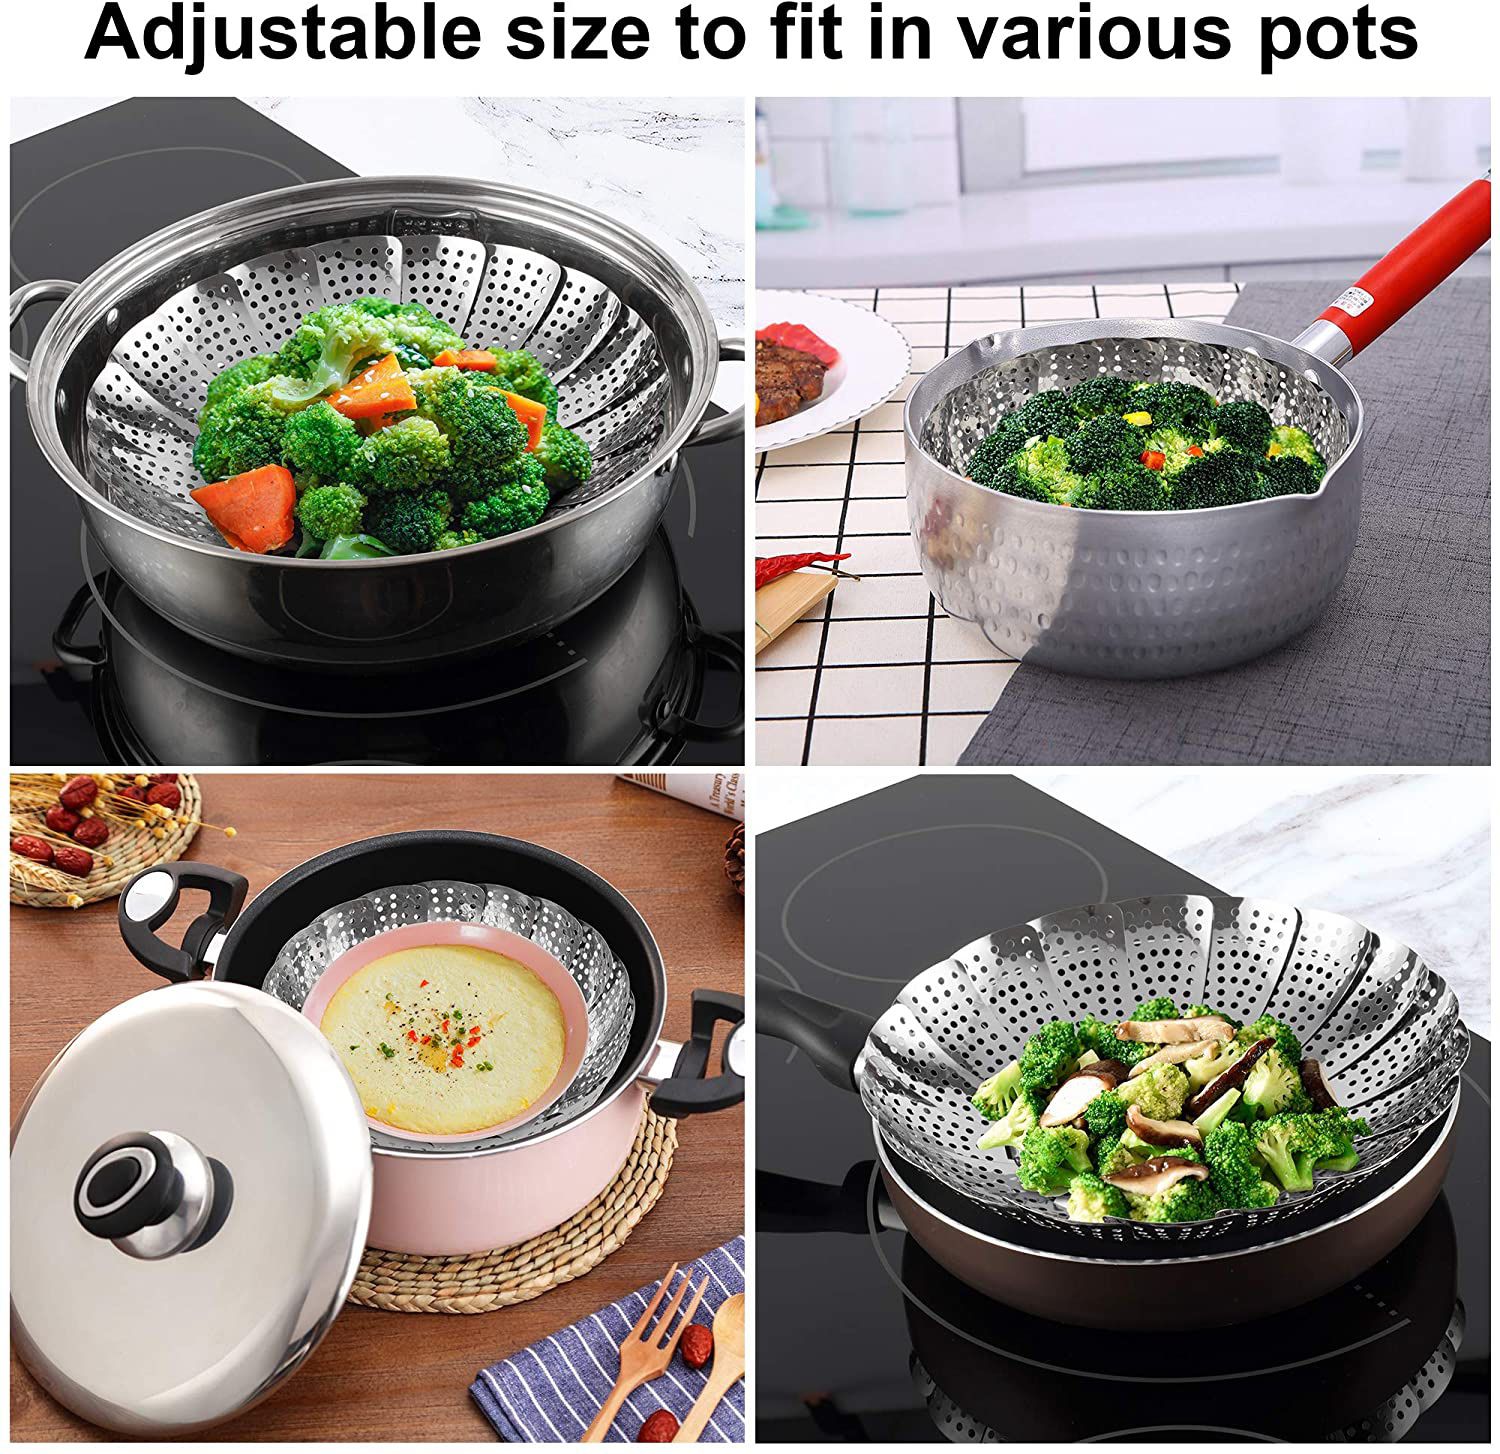 Brand New Stainless Steel Vegetable Steamer Basket Insert For Instant Pots and other Pots